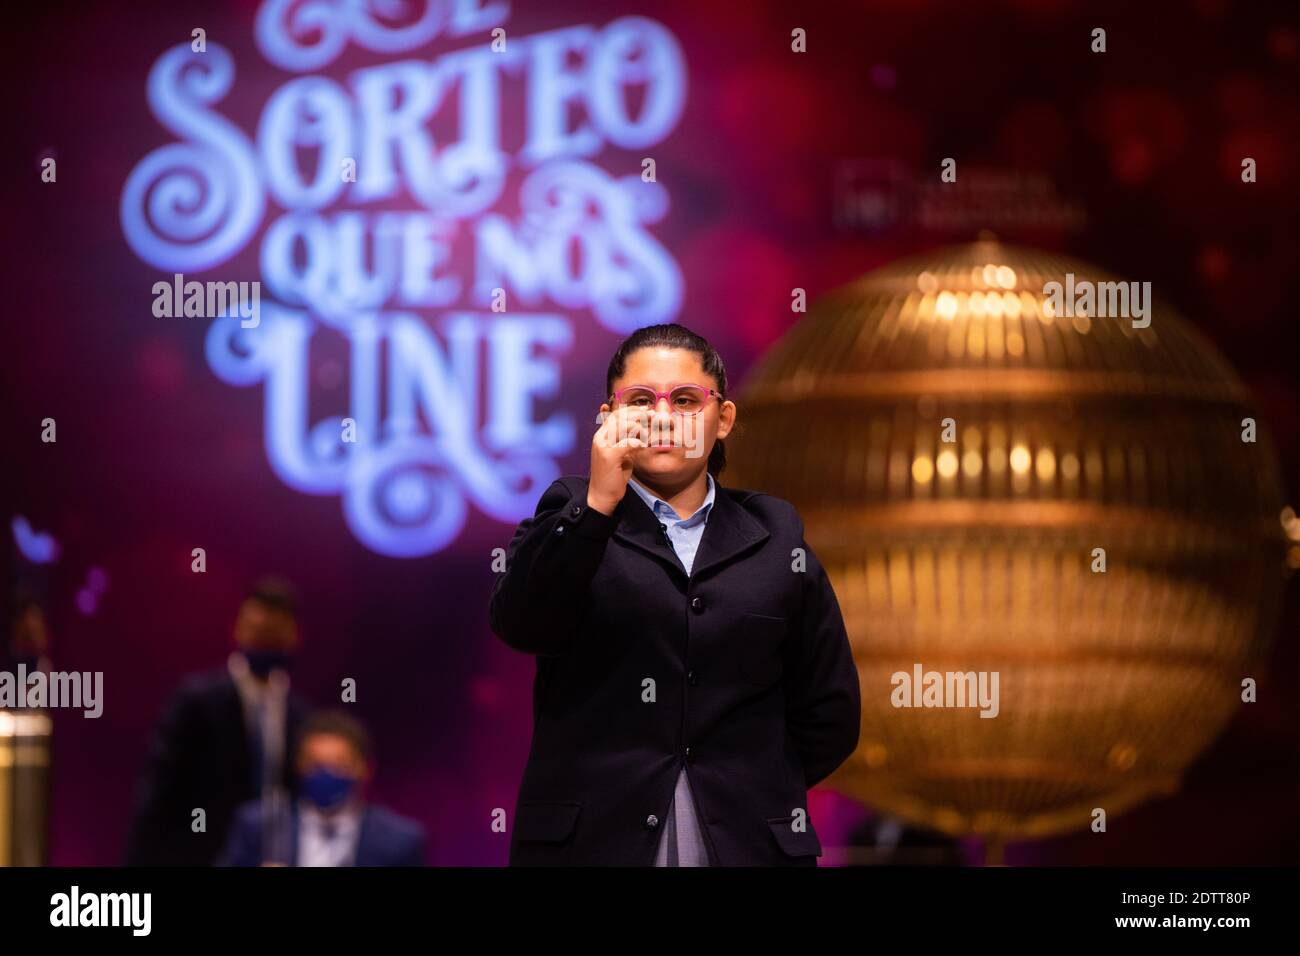 Madrid, Spain. 22 December, 2020: Pupils of the San Ildefonso school, hold the ball bearing of the third prize number during the draw of Spain's Christmas lottery named 'El Gordo' (Fat One) at the Teatro Real on December 22, 2020 in Madrid, Spain. The third prize number is 52472, with a total of 500.000 euros for the prize to be shared between ten ticket holders. Credit: Jon Imanol Reino/Alfa Images/Alamy Live News Stock Photo